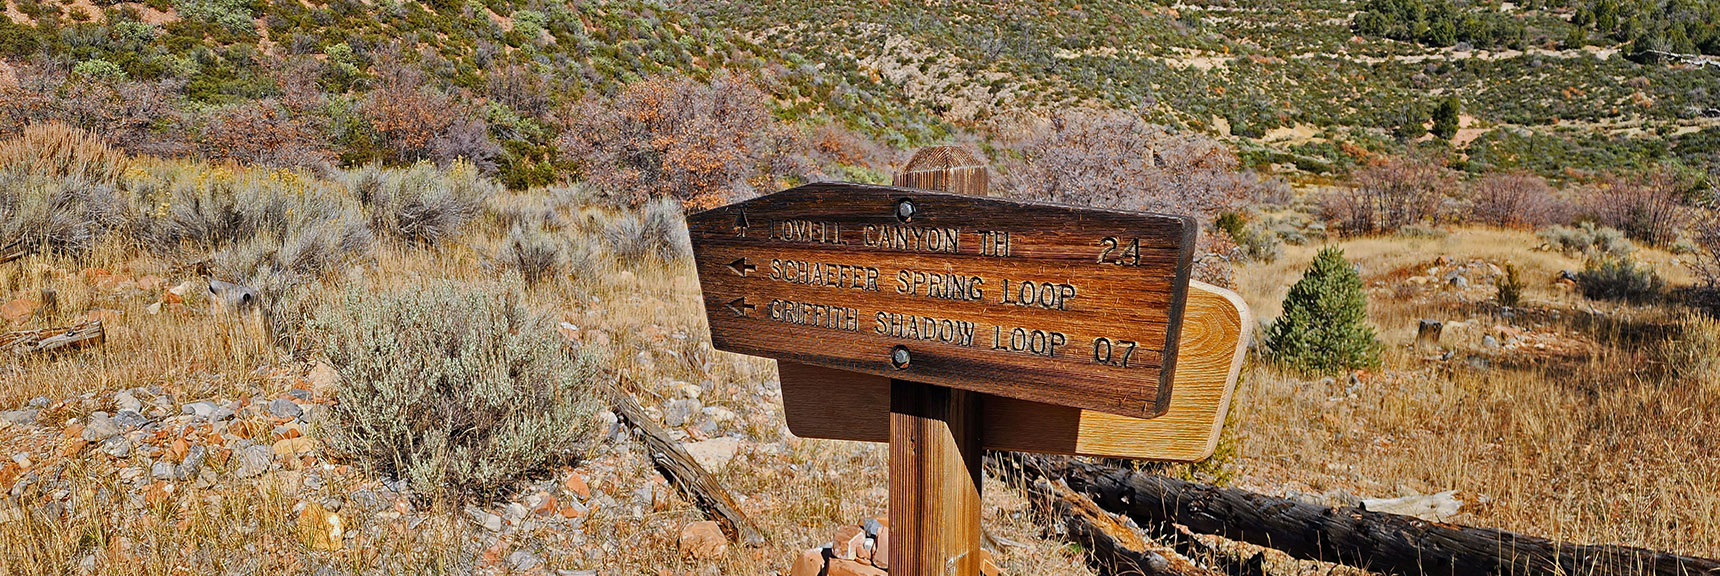 Old Back Side of Schaefer Springs Loop Sign. Don't Take Griffith Shadow Loop from Here. | Lovell Canyon Loop Trail | Lovell Canyon Nevada